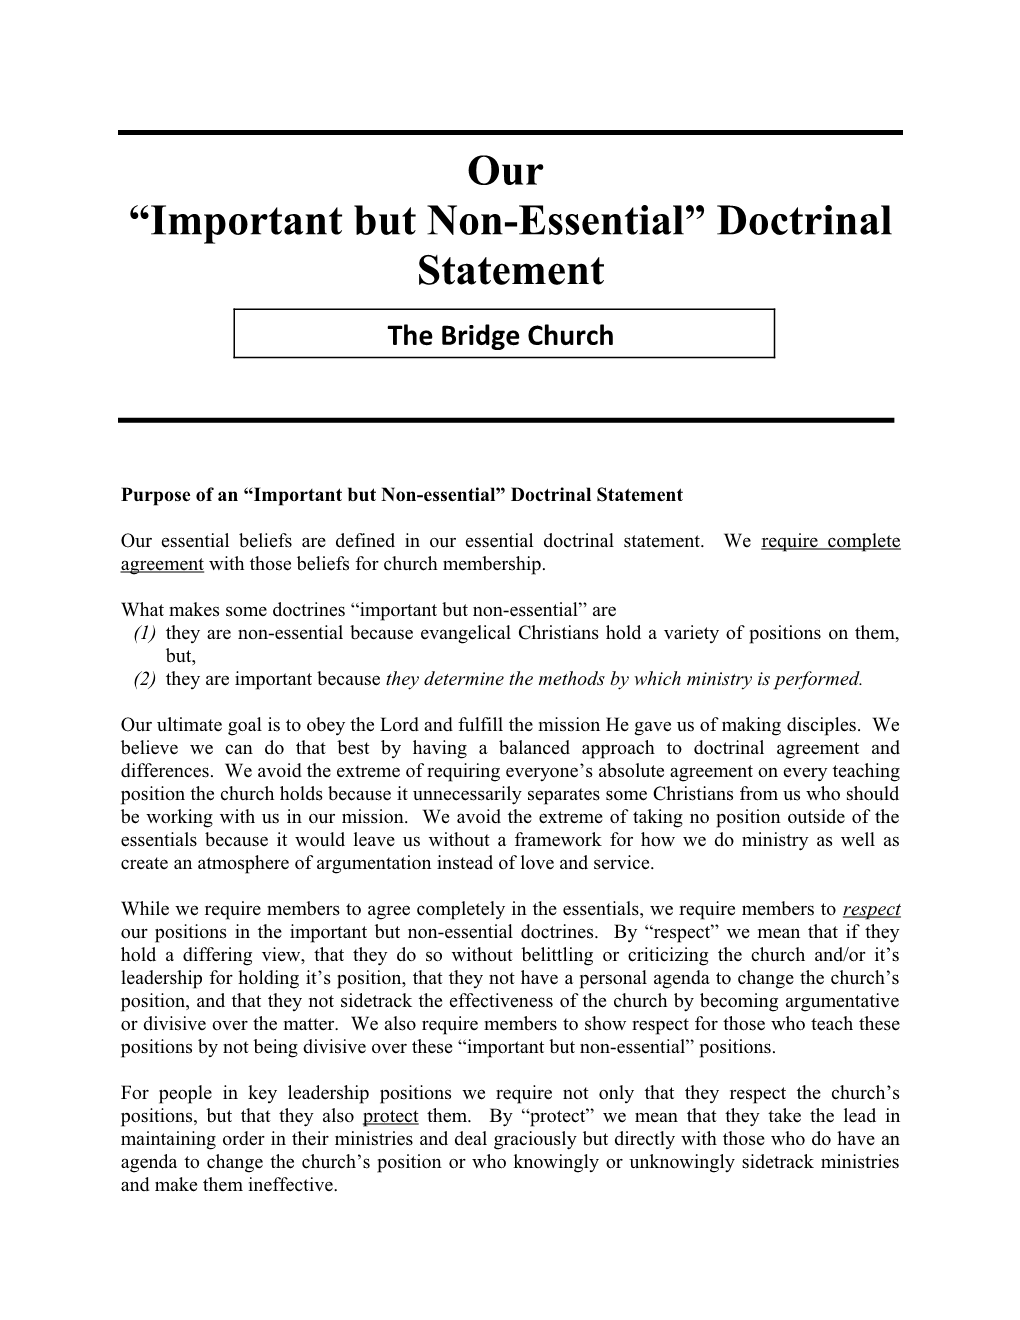 Important but Non-Essential Doctrinal Statement